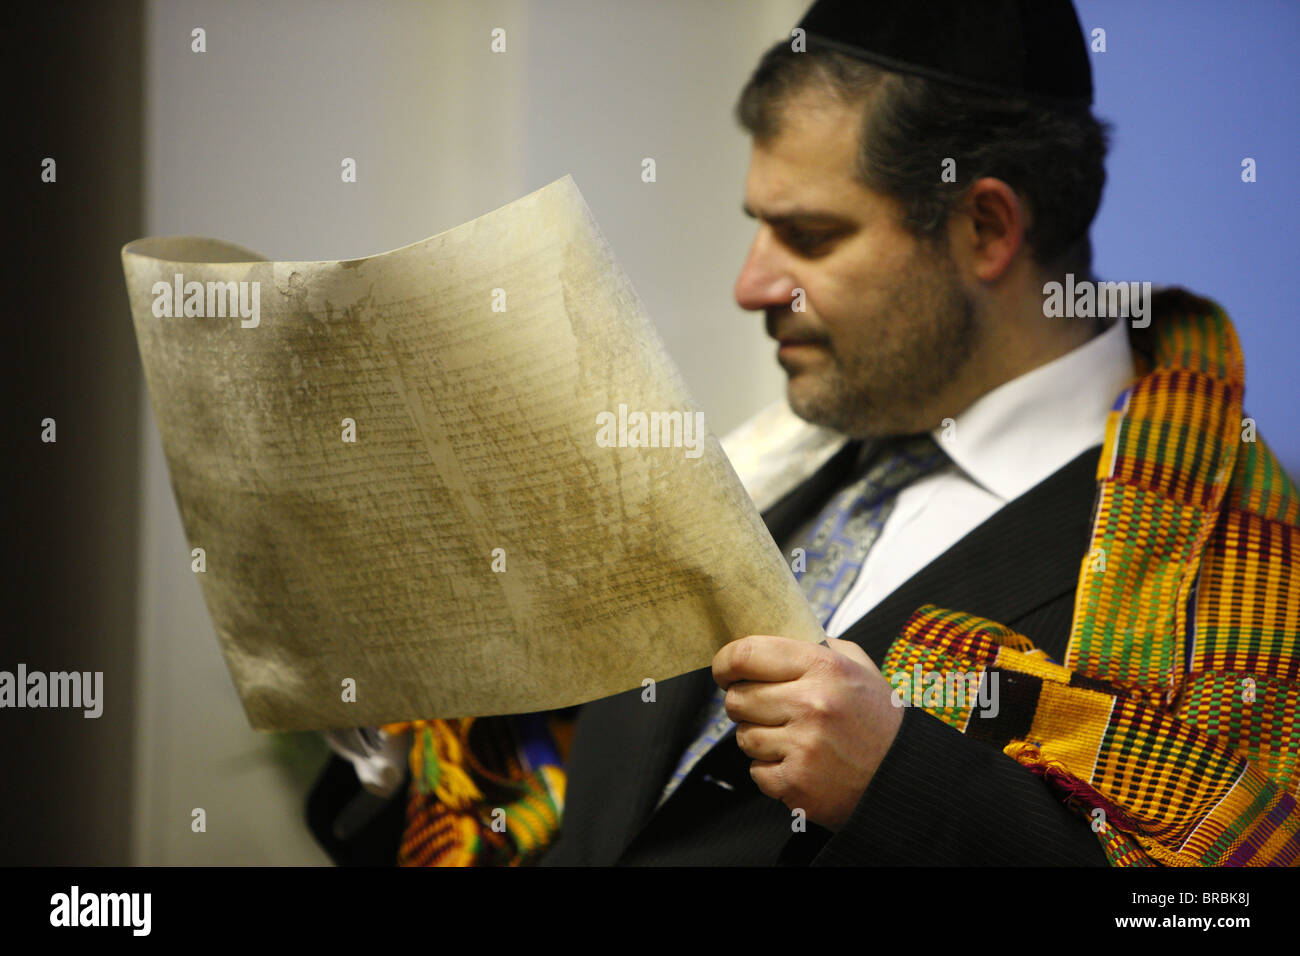 Book of Esther (Meguilah), Purim celebration in a Liberal synagogue, Paris, France Stock Photo